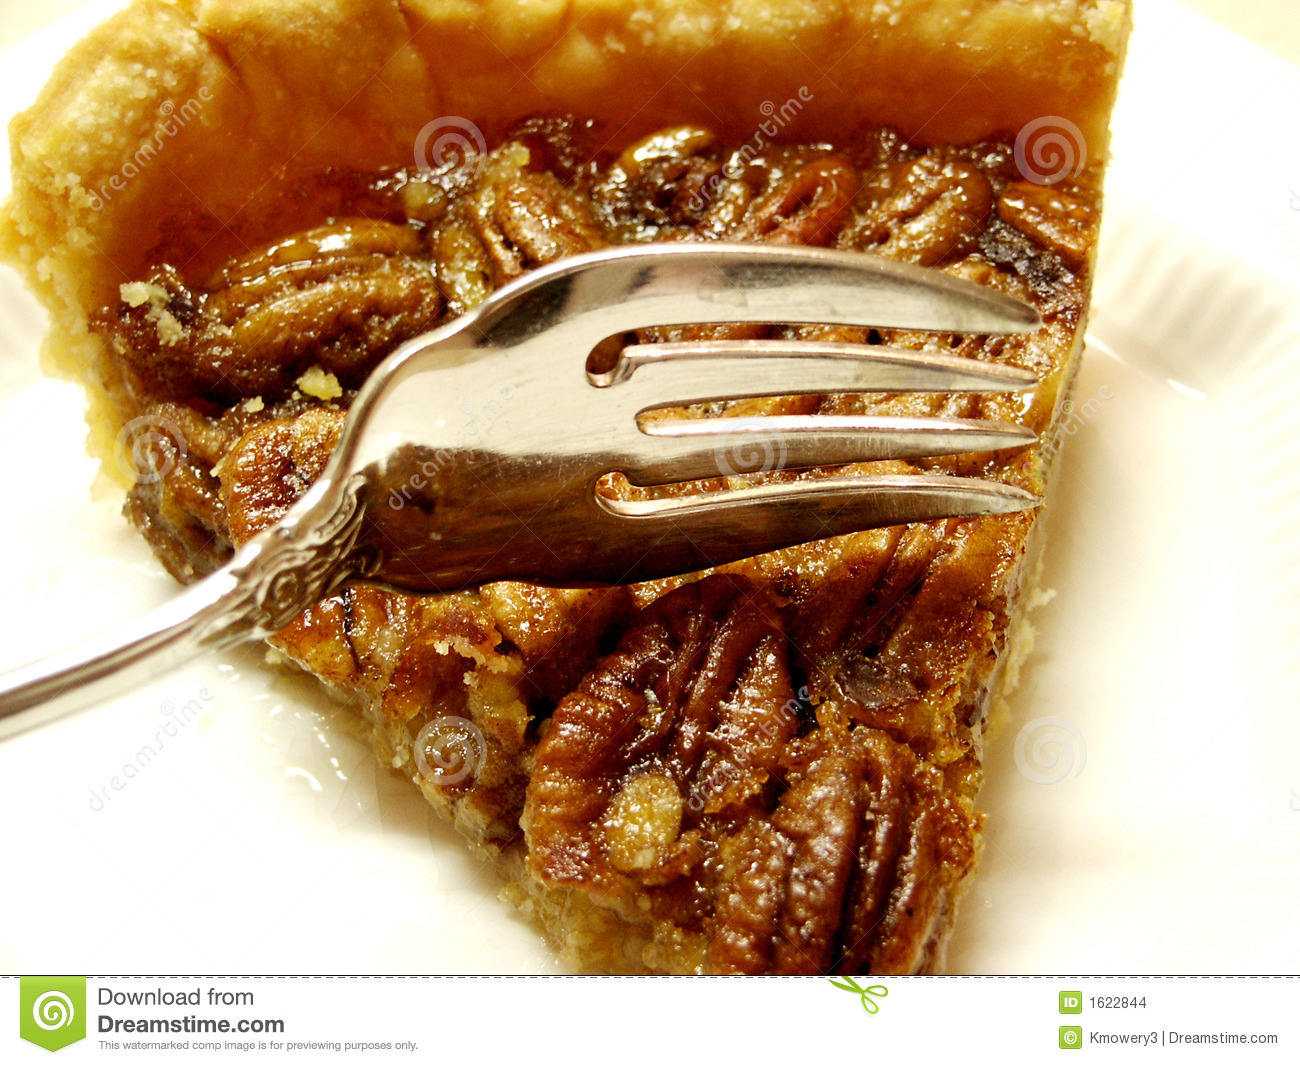 Pecan Pie On White Plate With Fork On Top Ready To Dig In 